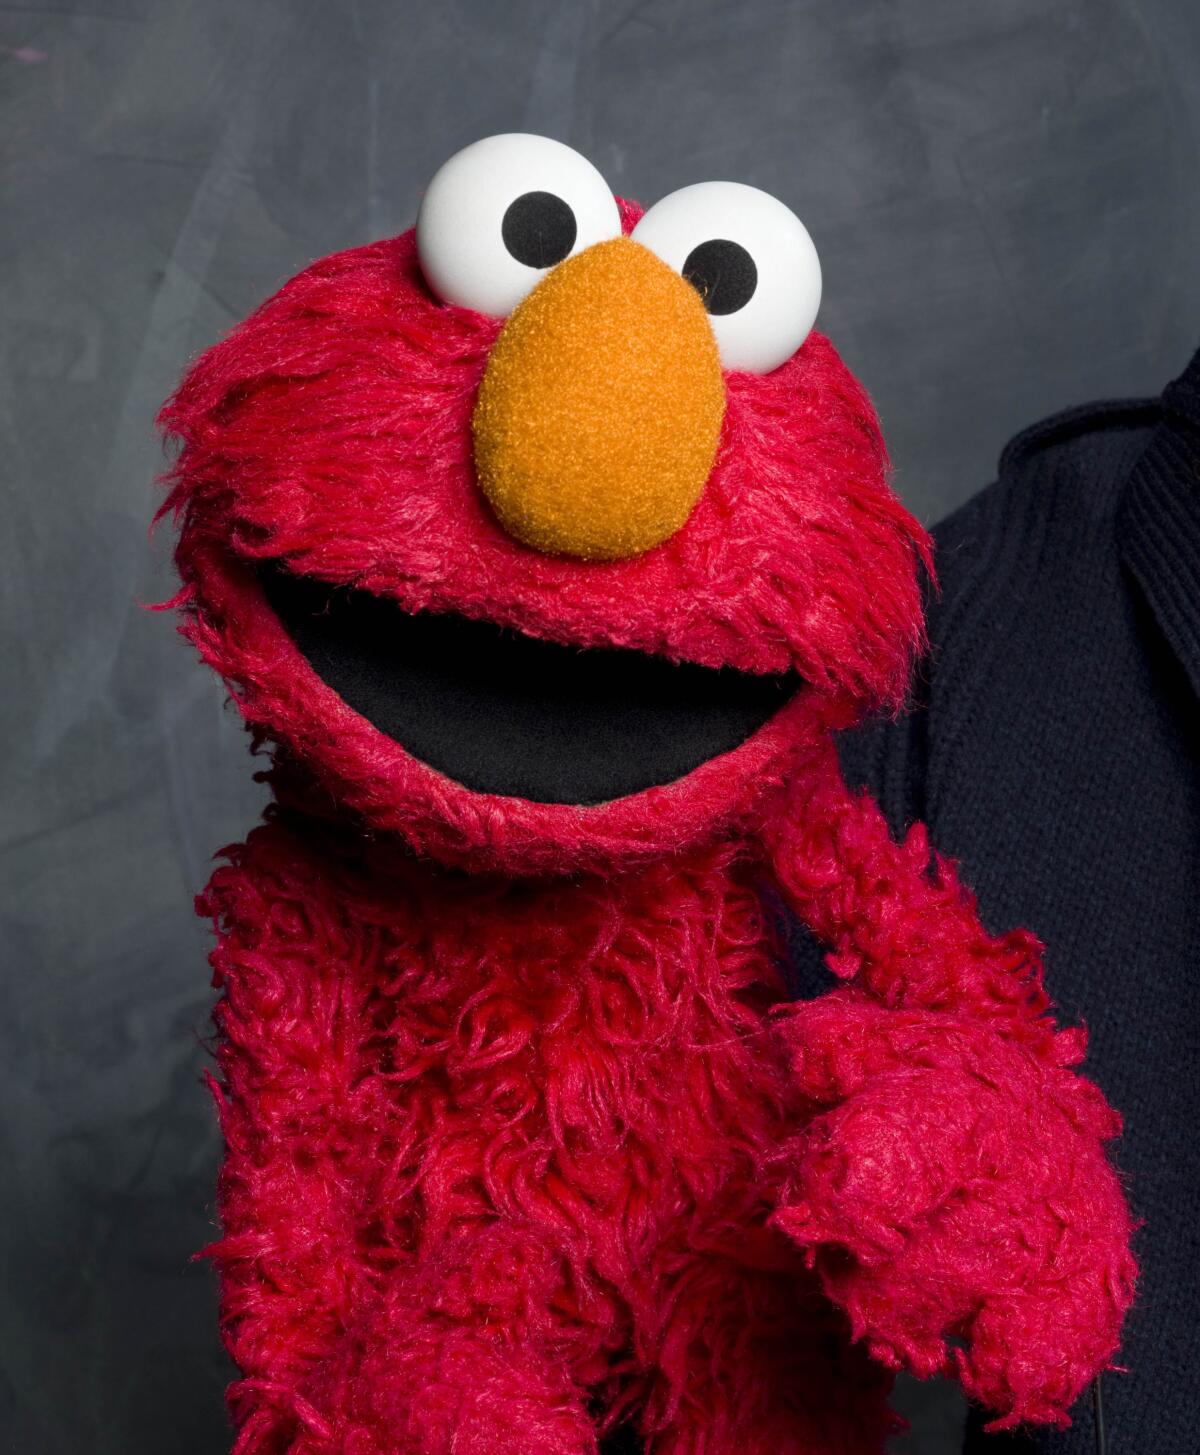 A close-up on Elmo, the red muppet with an orange nose who stars in "Sesame Street"